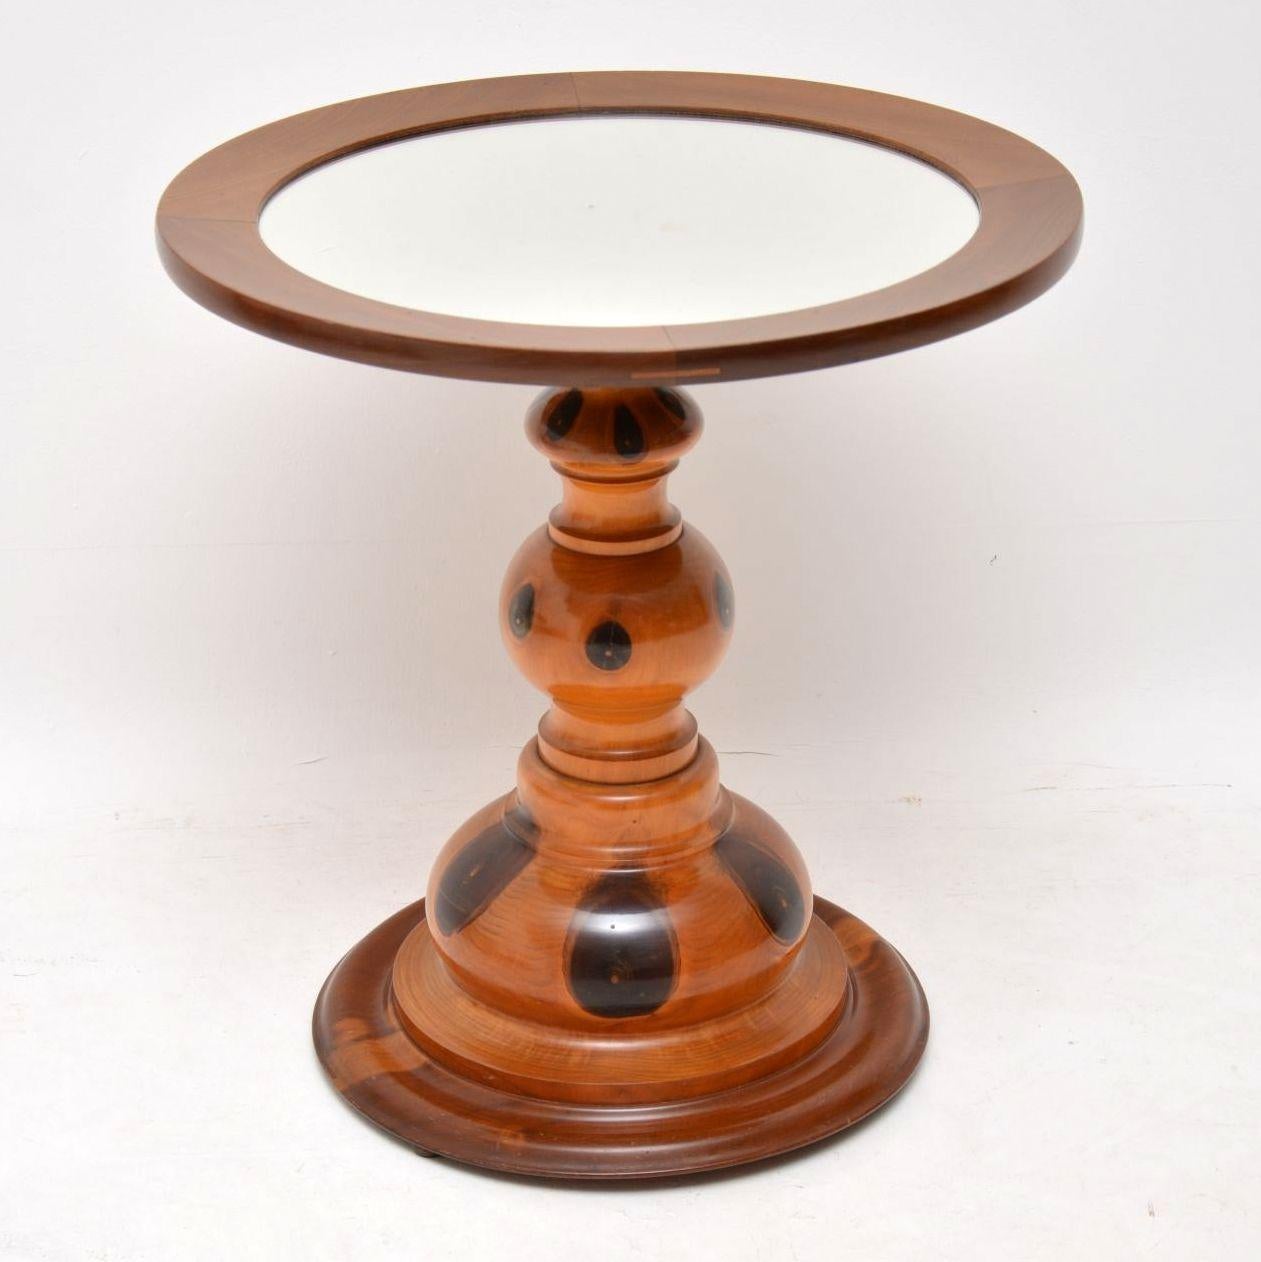 This antique occasional table is made from a very unusual wood, which I can’t quite figure out. It could be a form of rosewood or olive wood, but whatever it is, it has some very distinct figuring in it. This table has an inset mirror on the top and